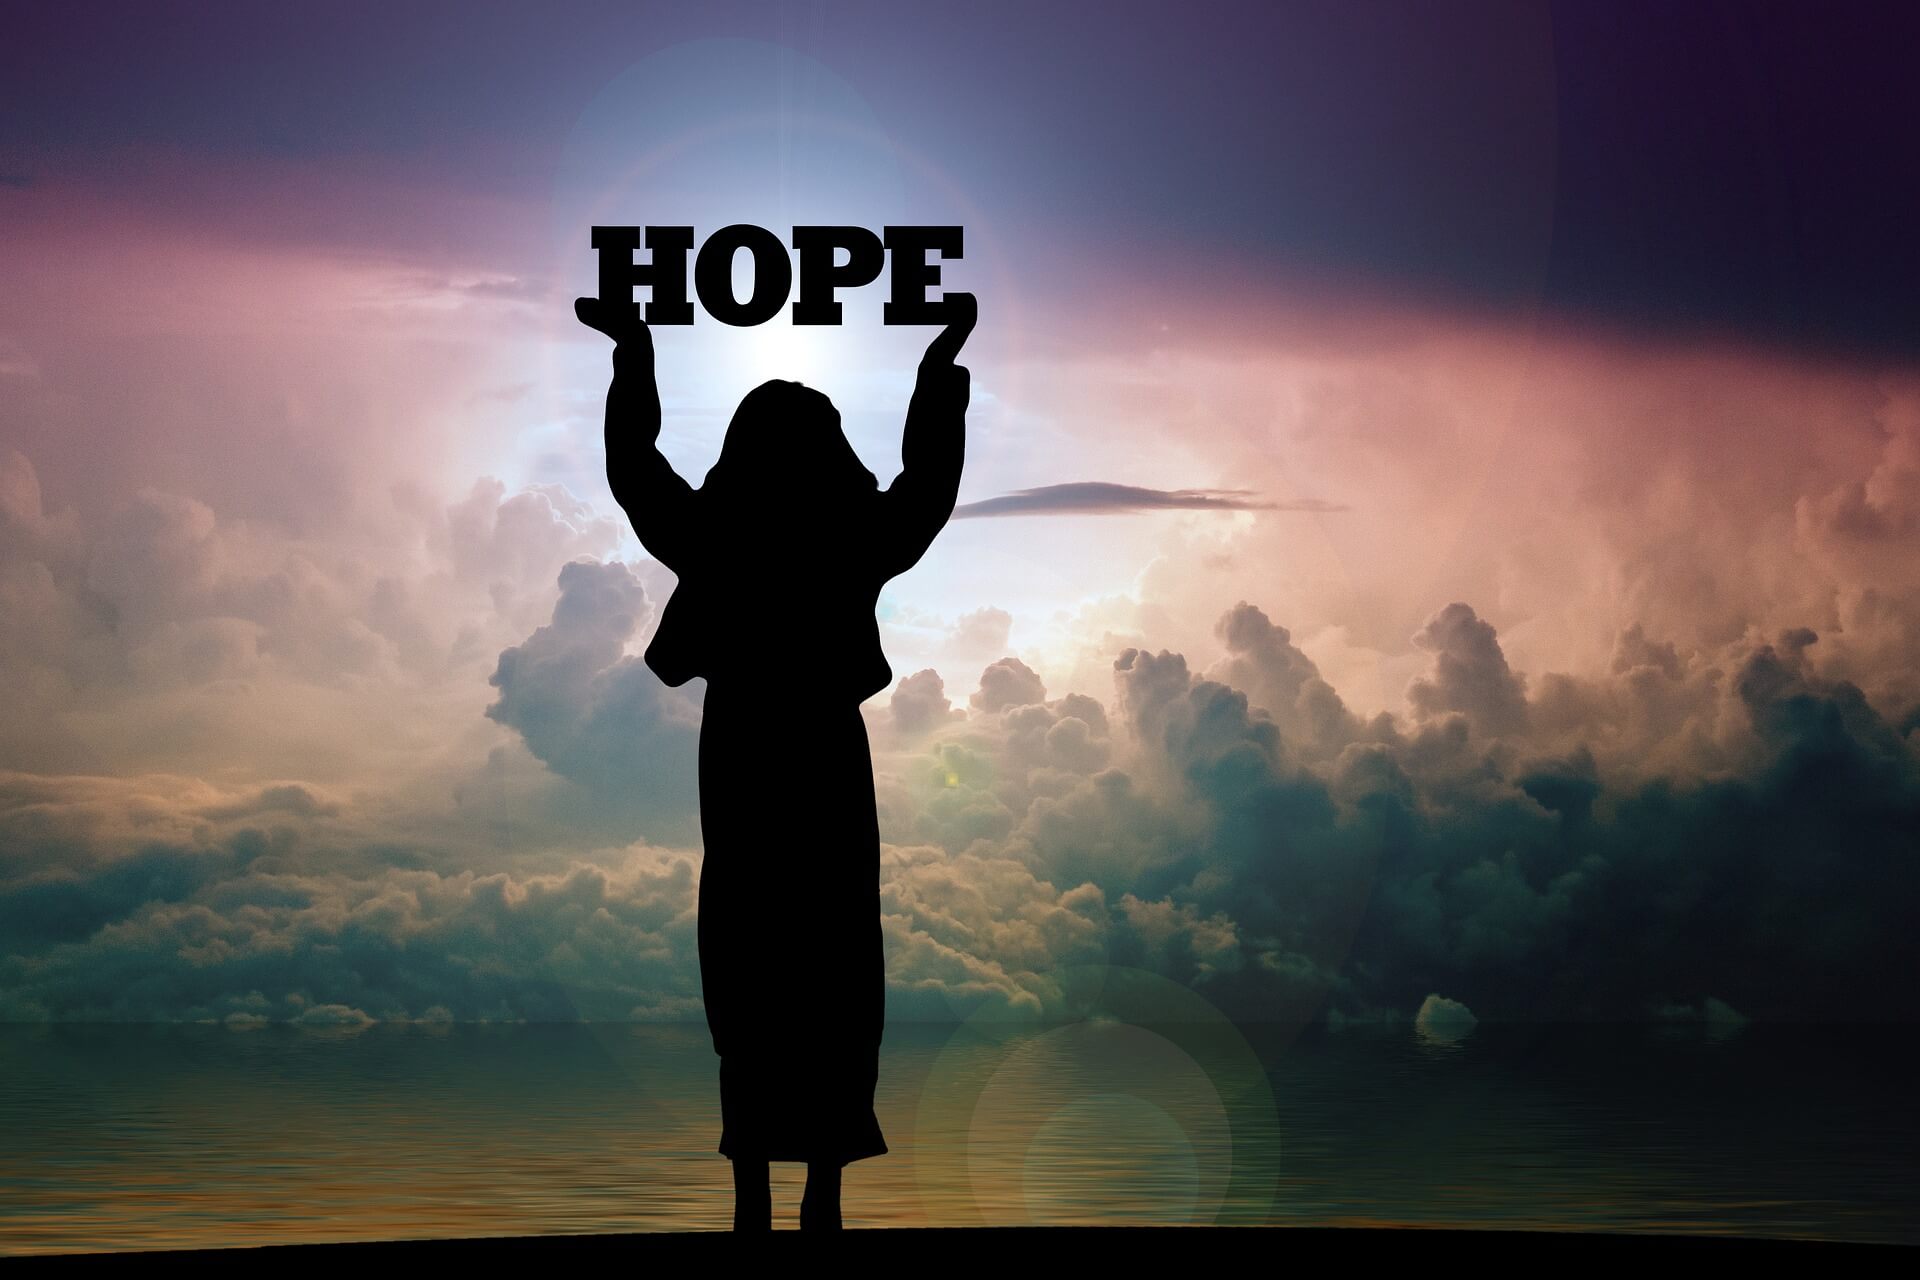 The silhouette of a woman holding the word hope in front of the sky